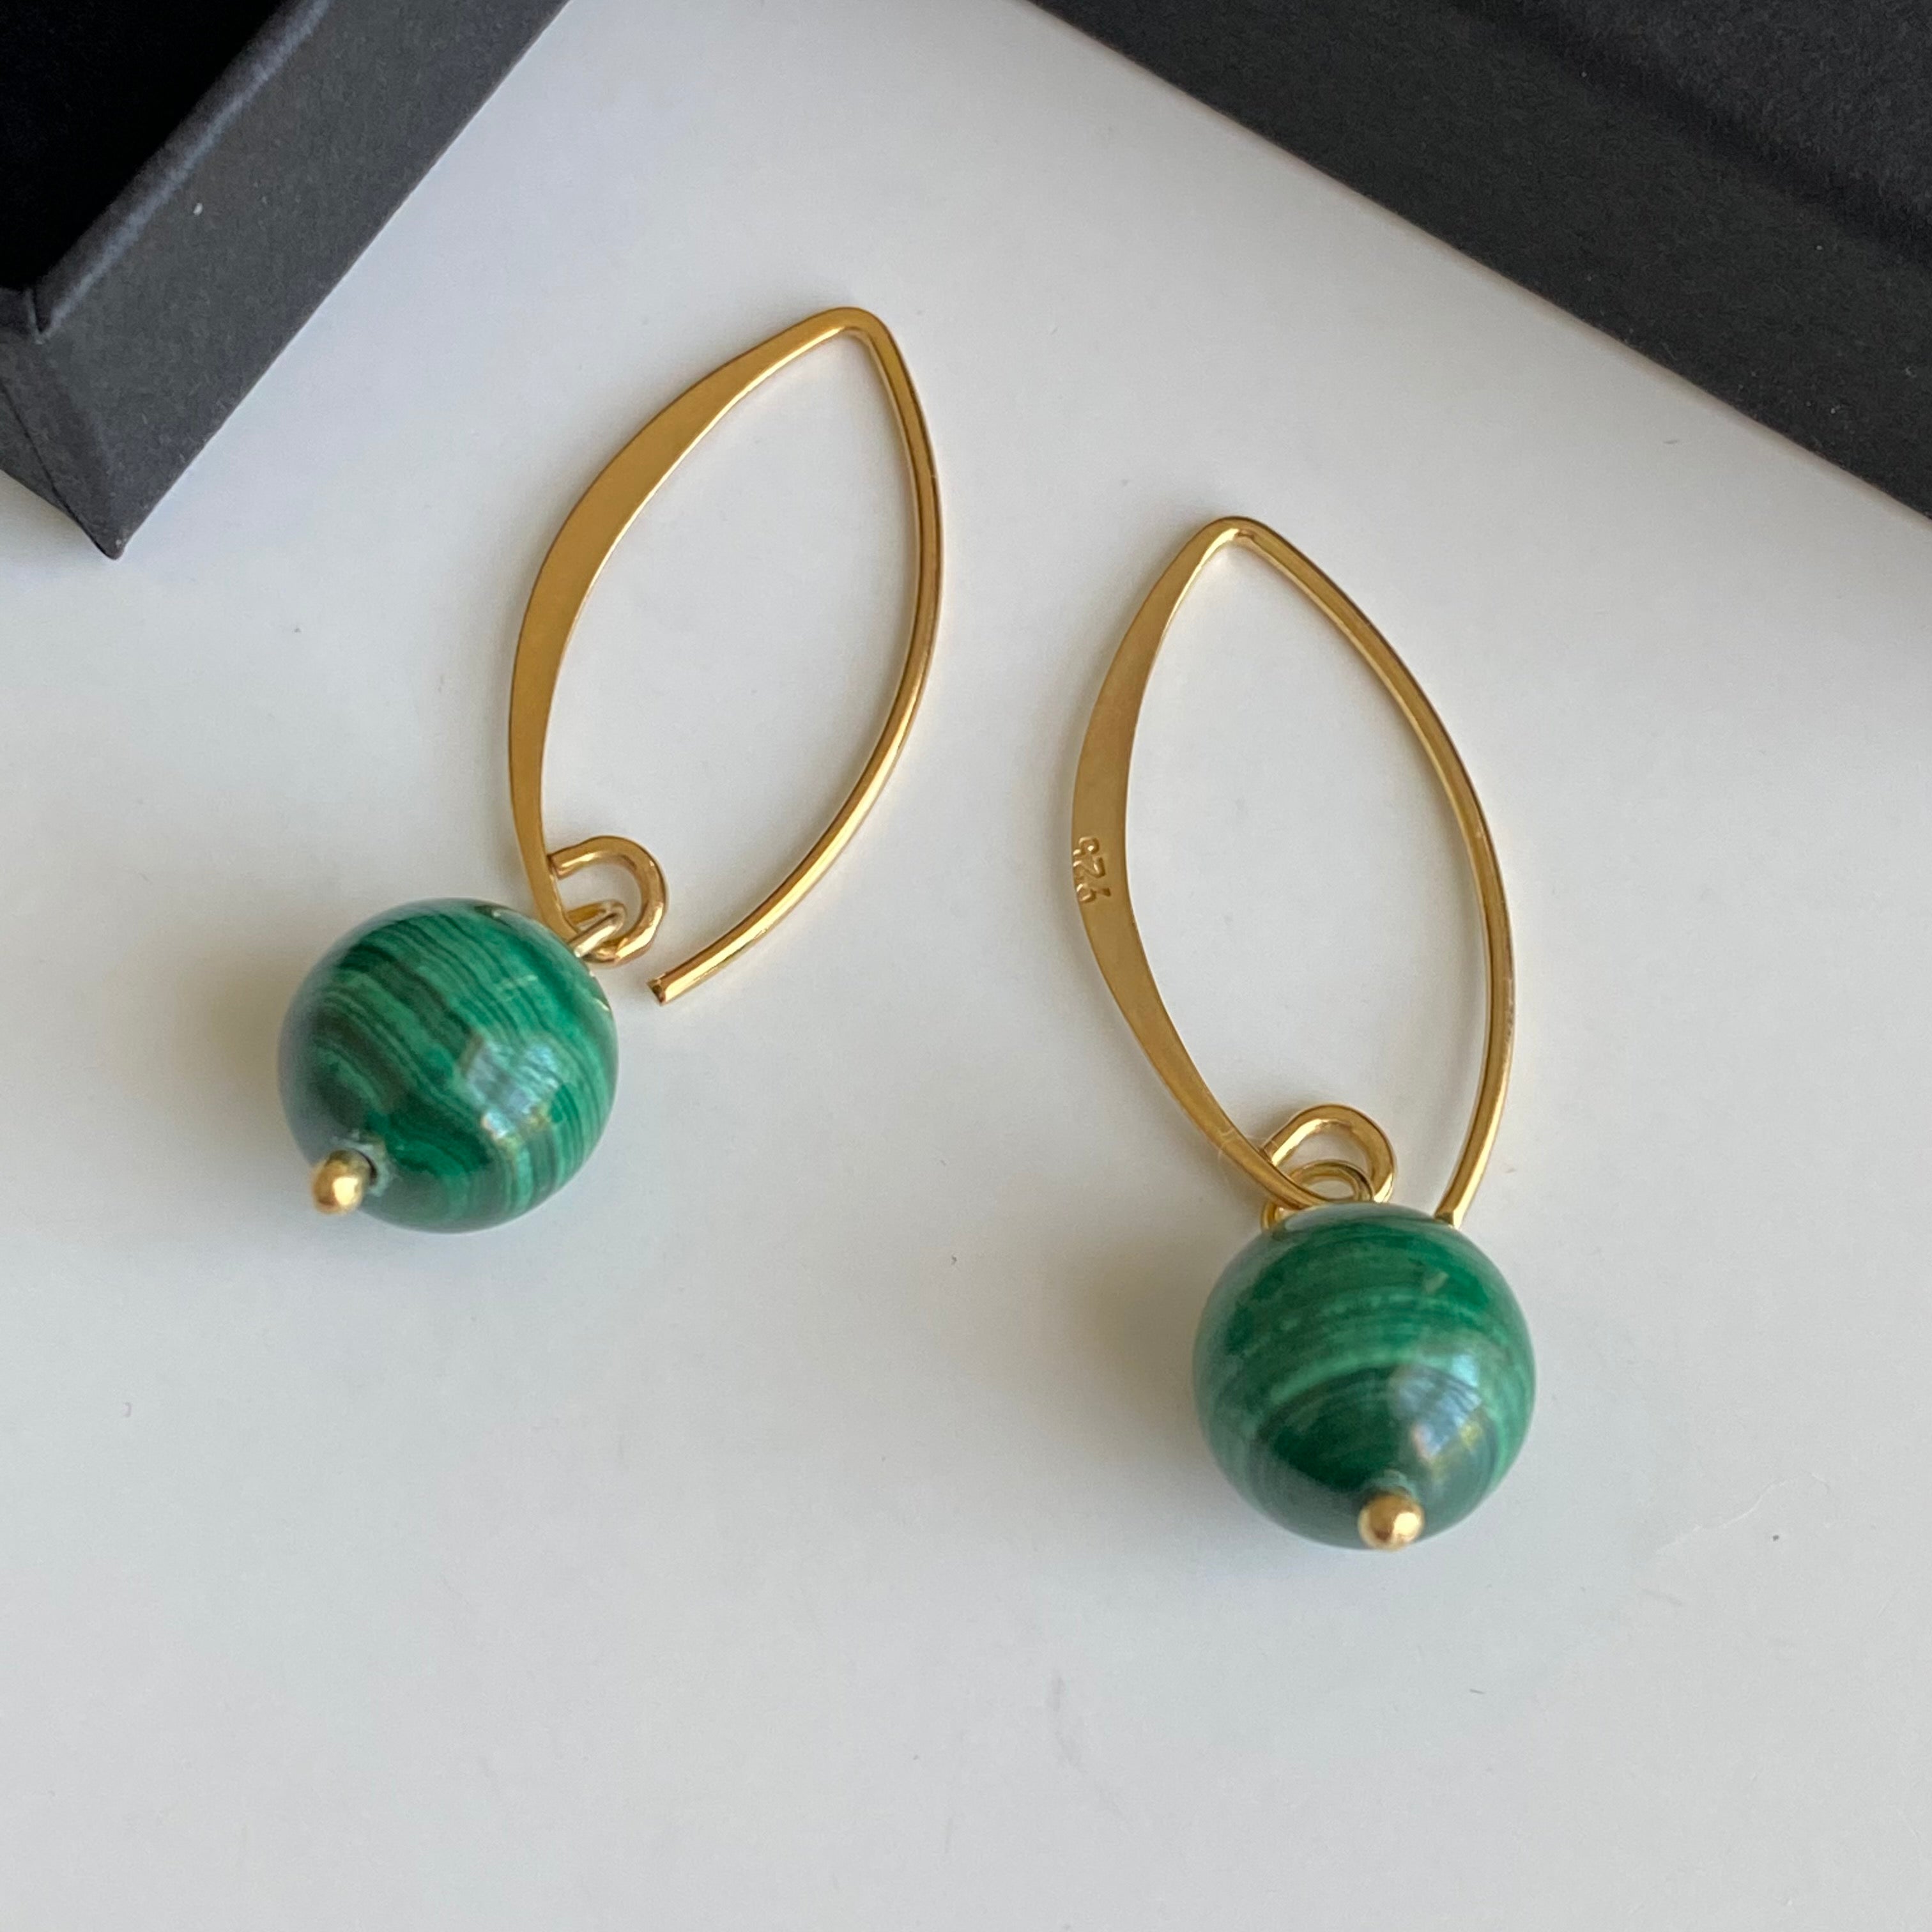 Gold Plated Sterling Silver Threader Hook Earrings - Malachite